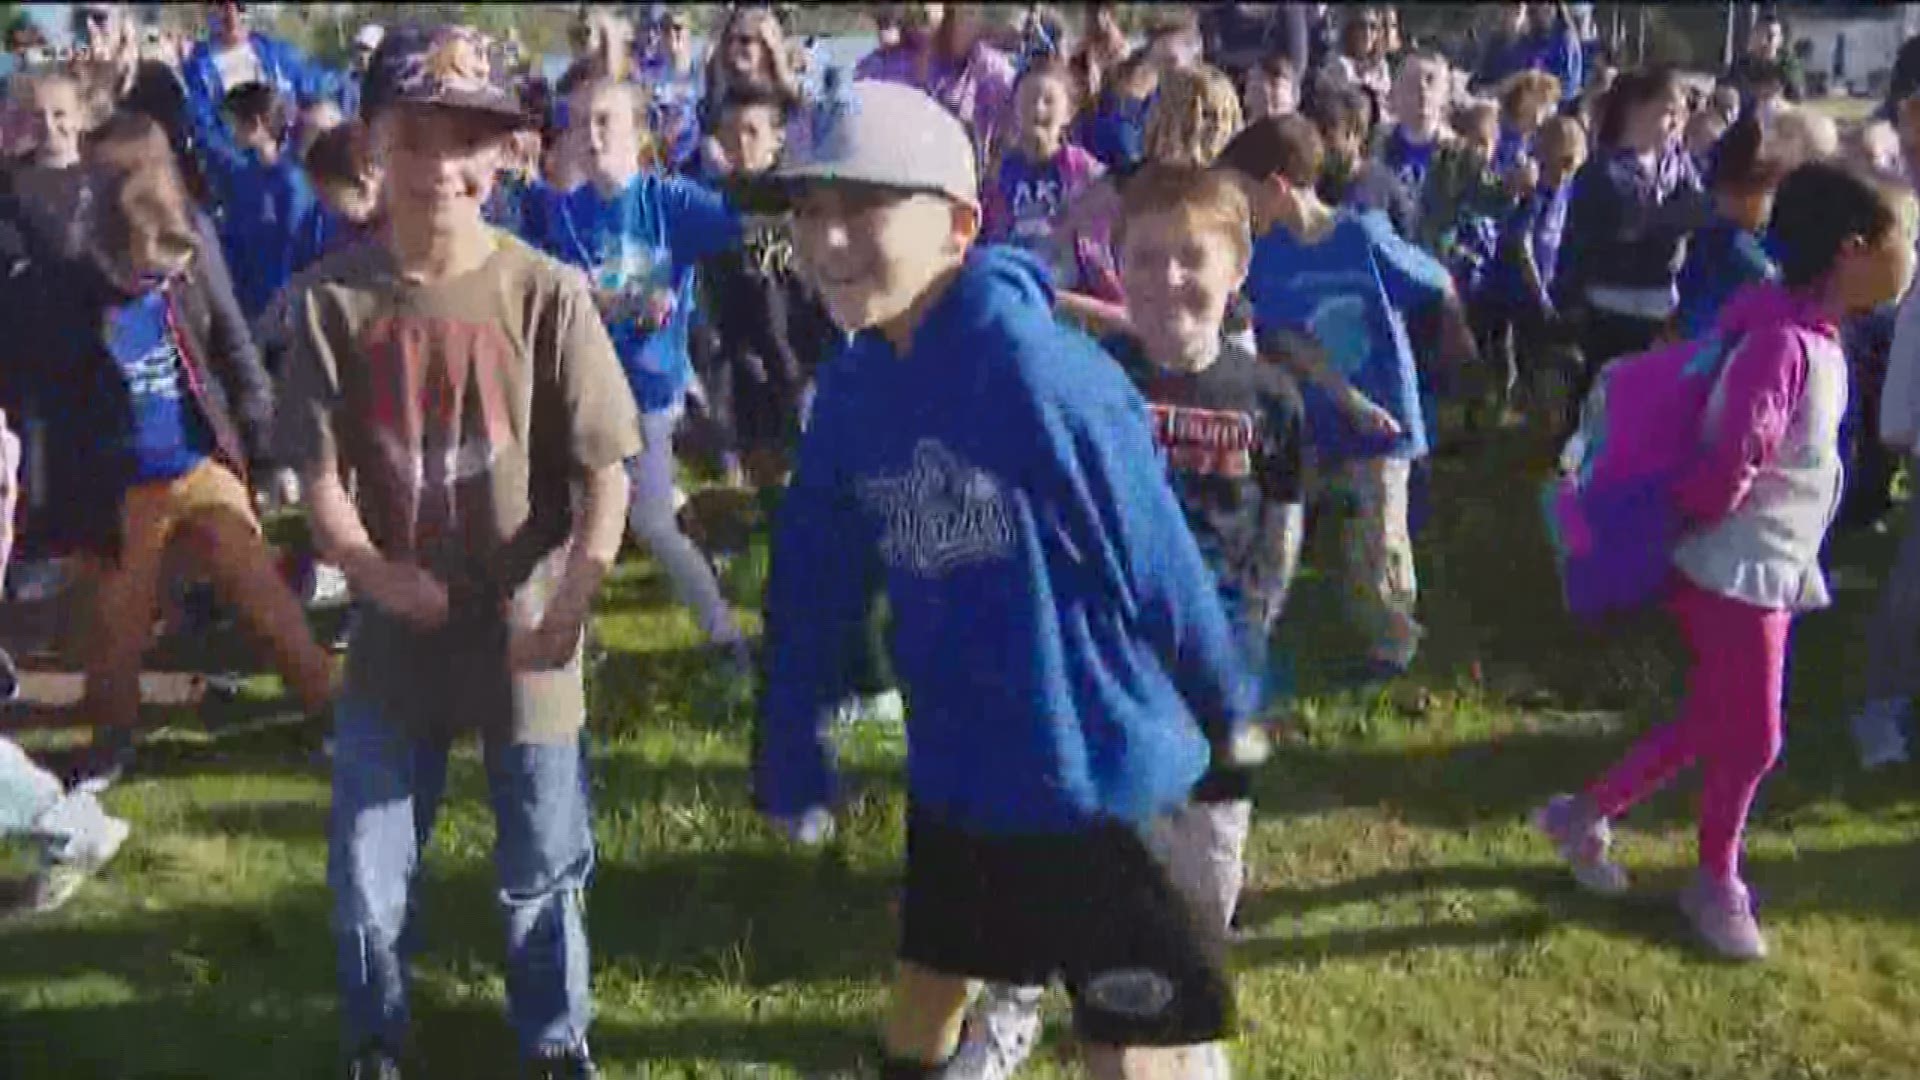 To kick off the week, a fourth grade student had the idea to gather classmates and attempt to beat the world record for the number of people doing the popular flossing dance together.